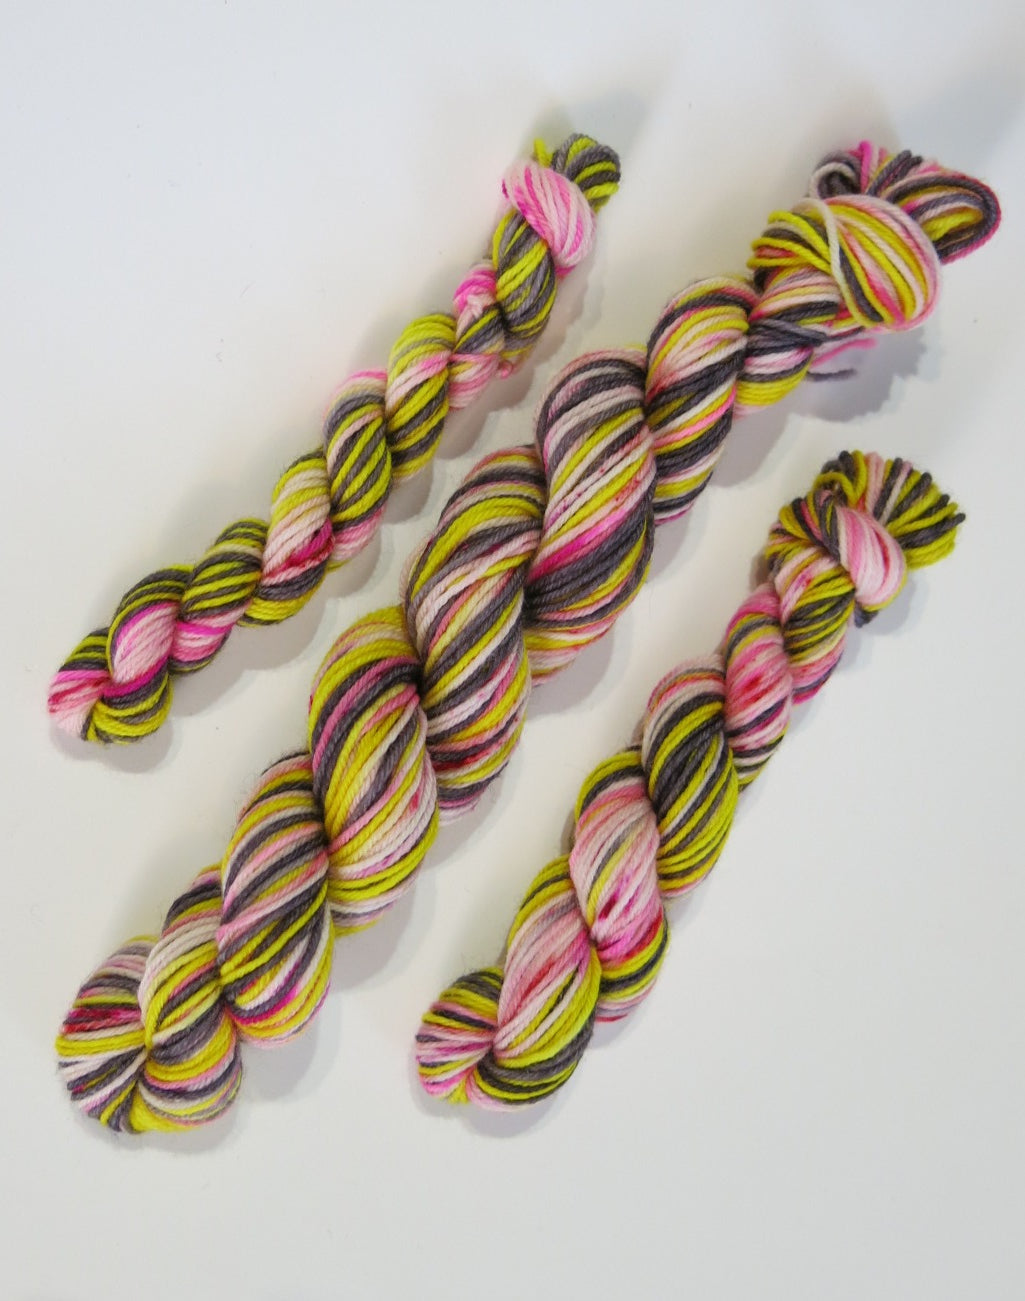 indie dyed mini skeins in yellow, black and pink